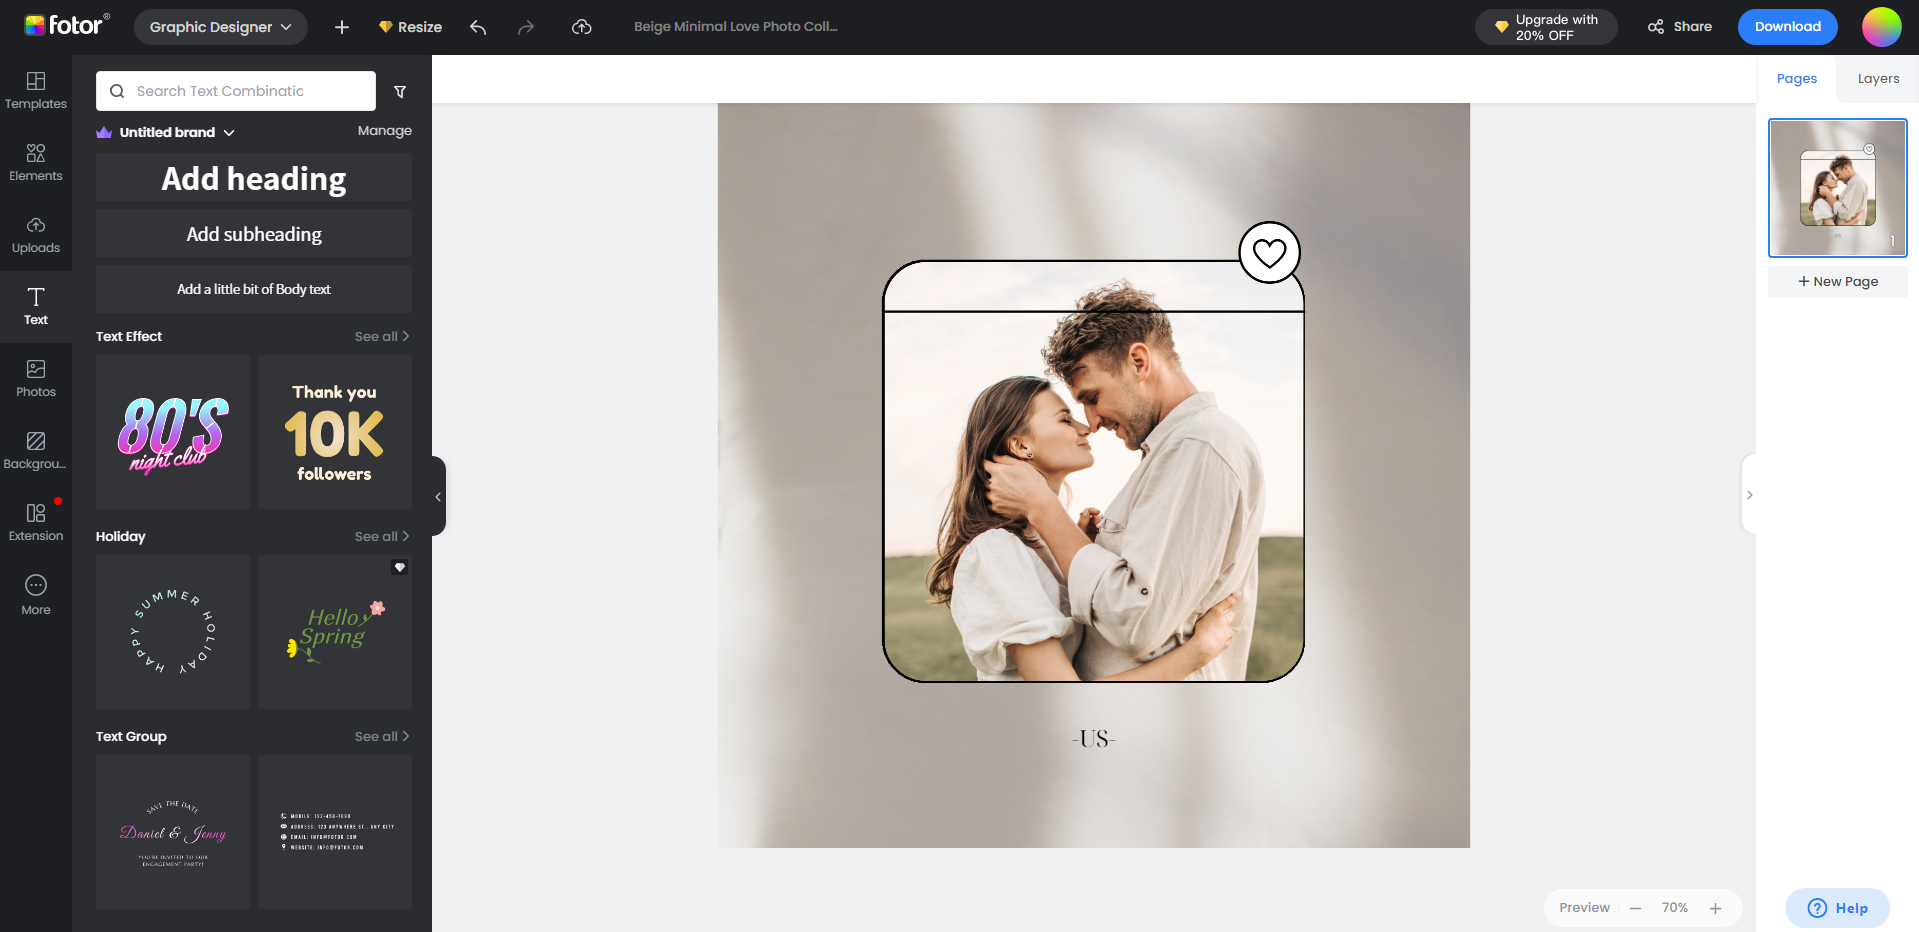 use fotor's text editor to add one word caption to the couple image in Fotor's instagram post template